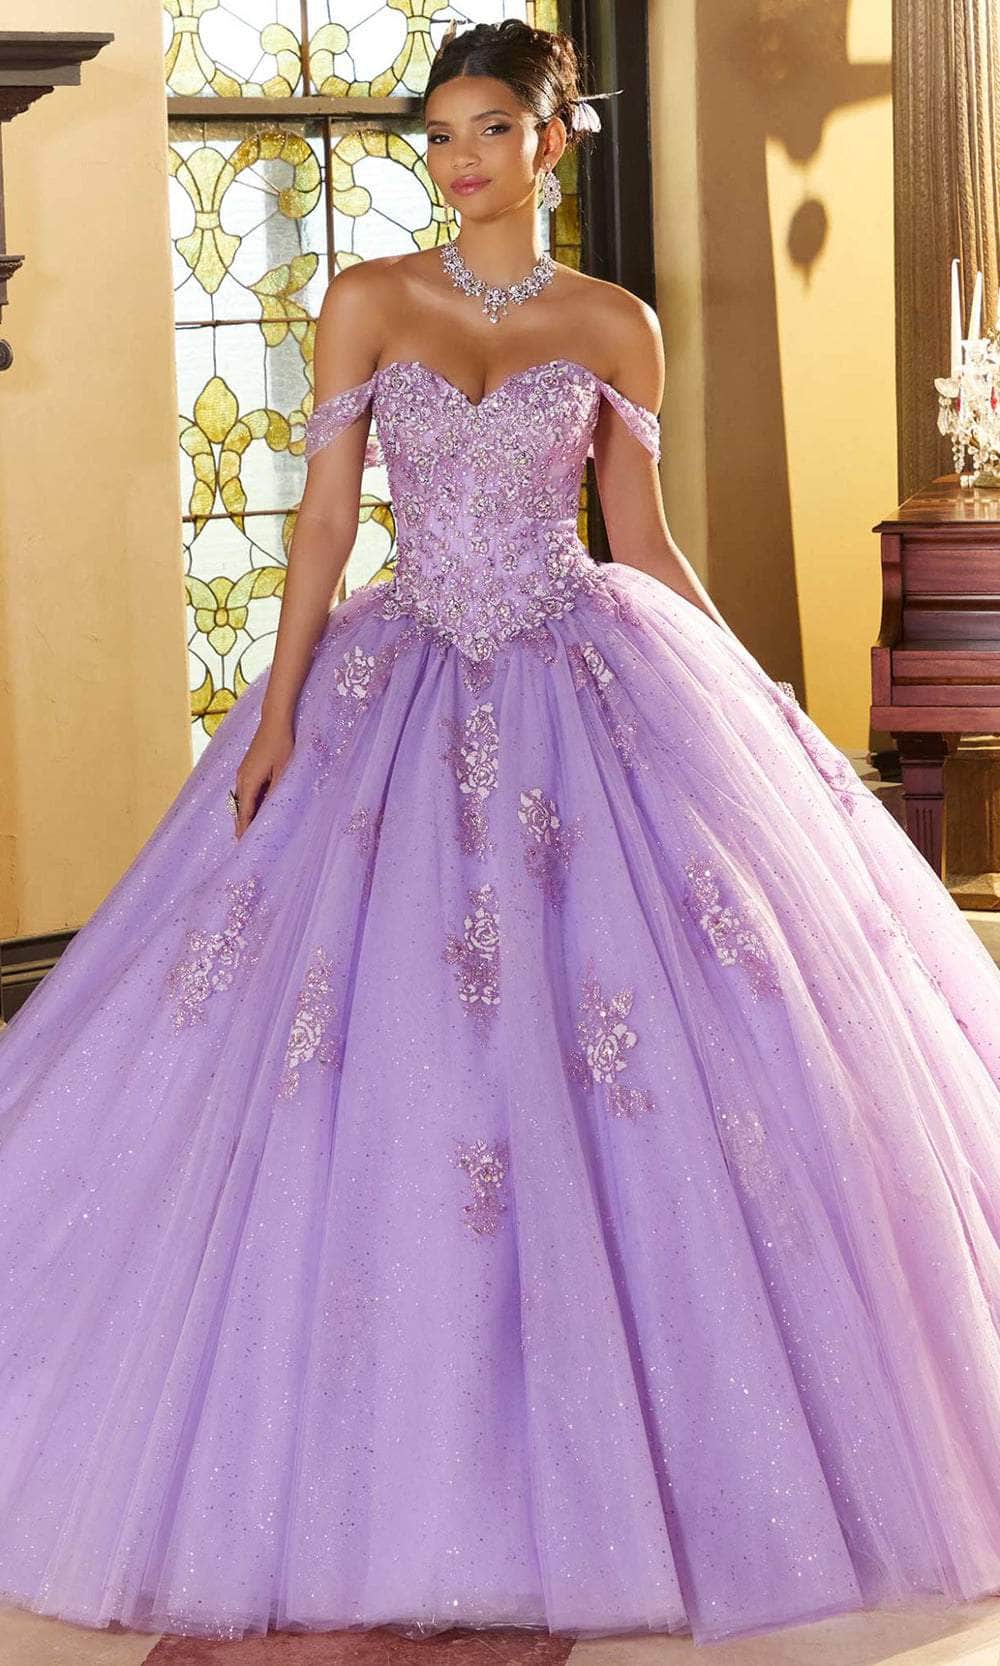 Mori Lee 60152 - Strapless Sweetheart Ballgown Ball Gowns 00 / Orchid